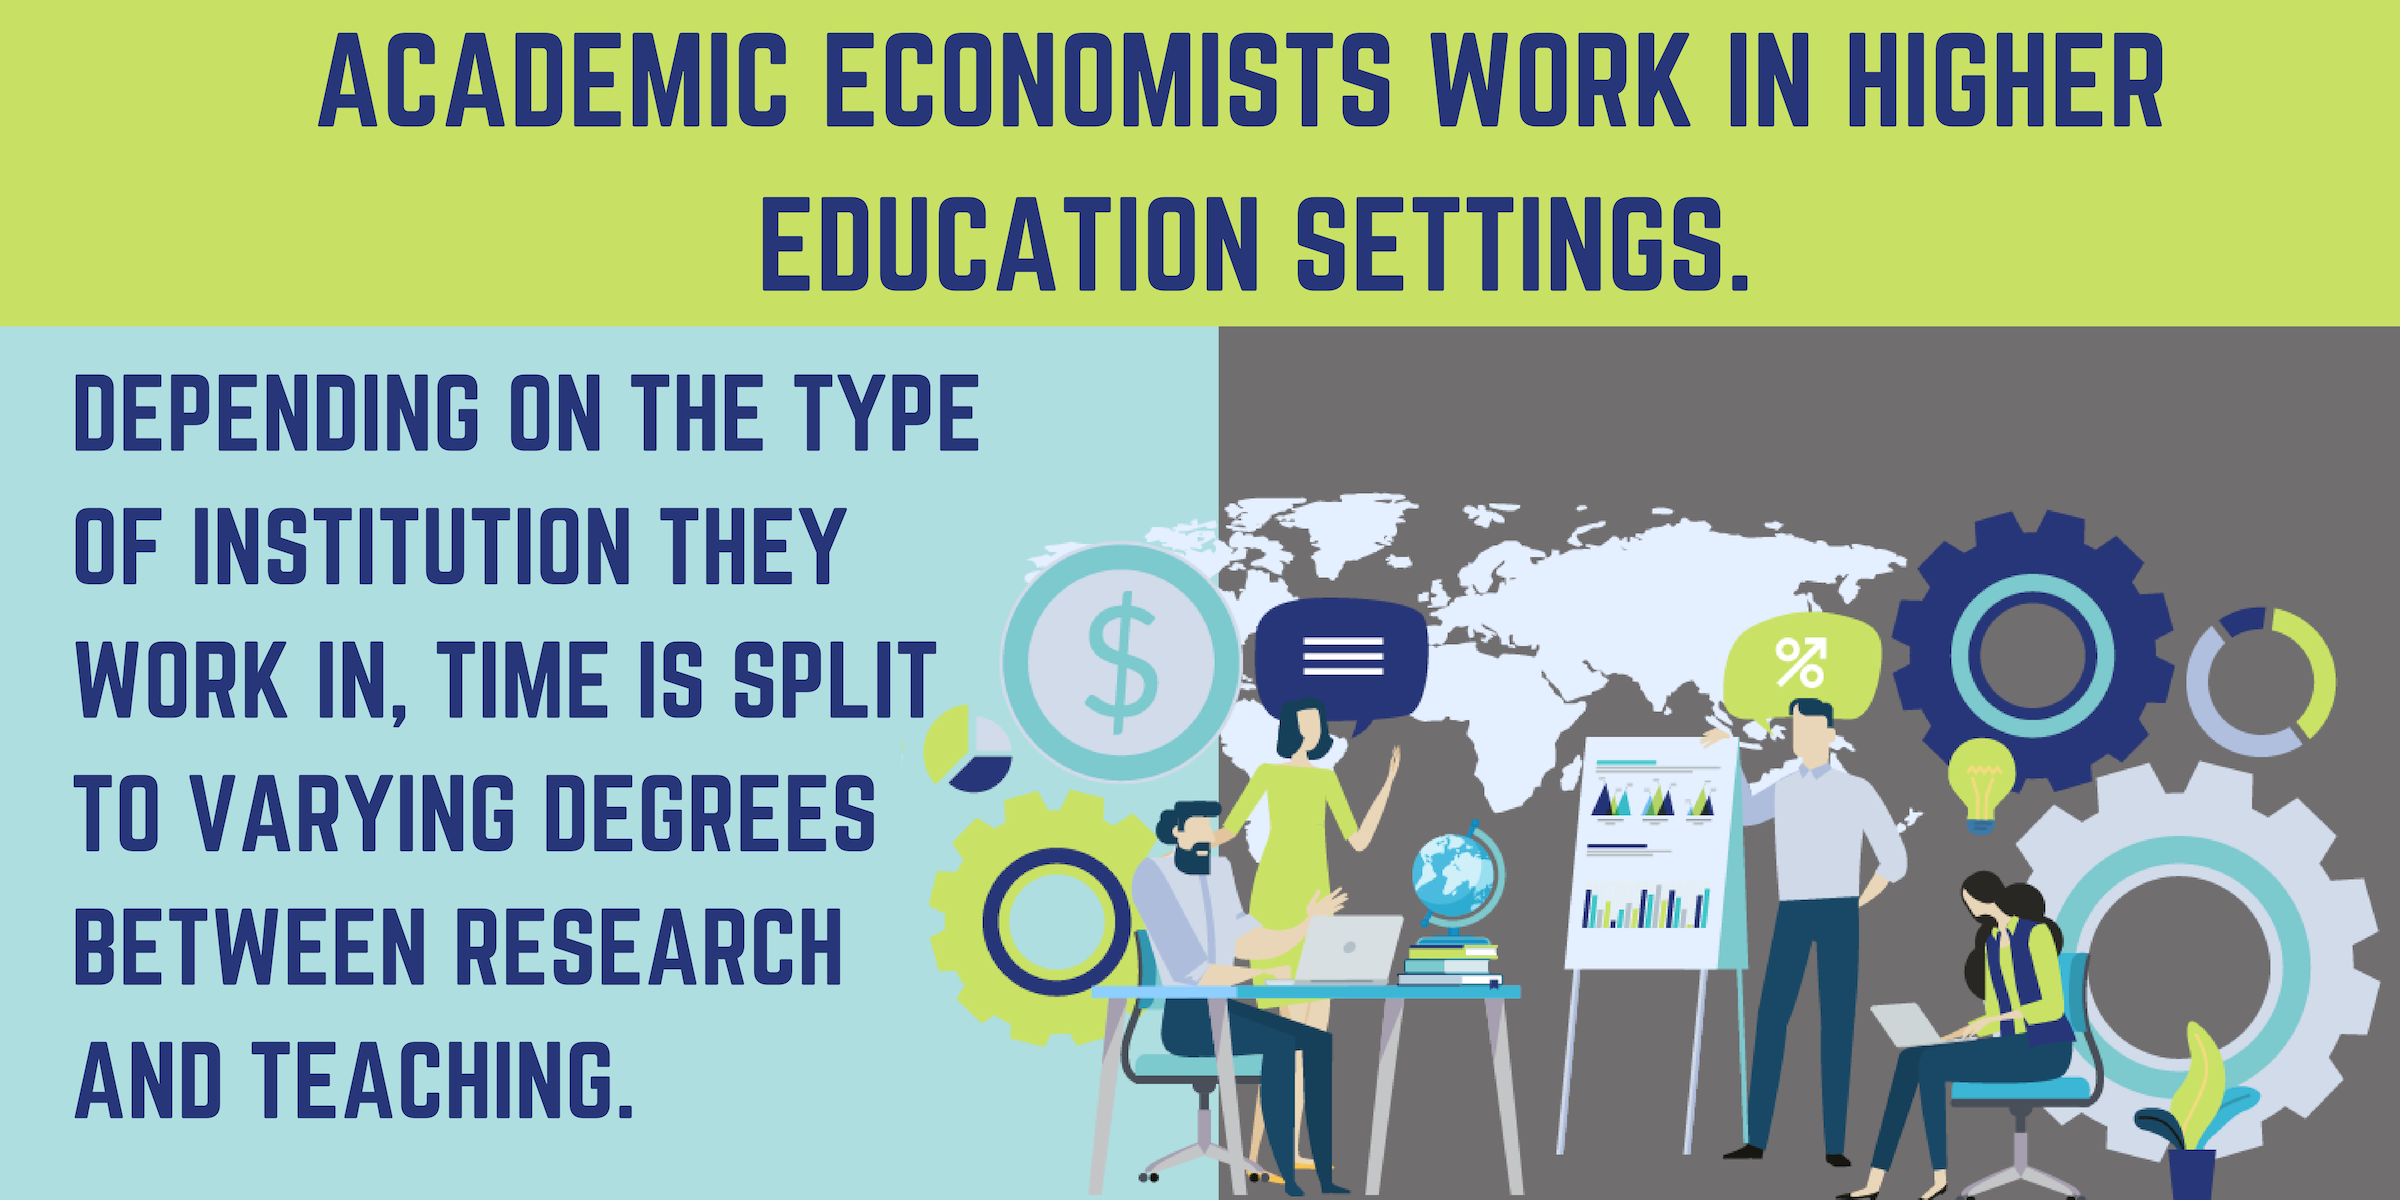 Academic Economists work in higher education settings. Depending on the type of institution they work in, time is split to varying degrees between research and teaching.